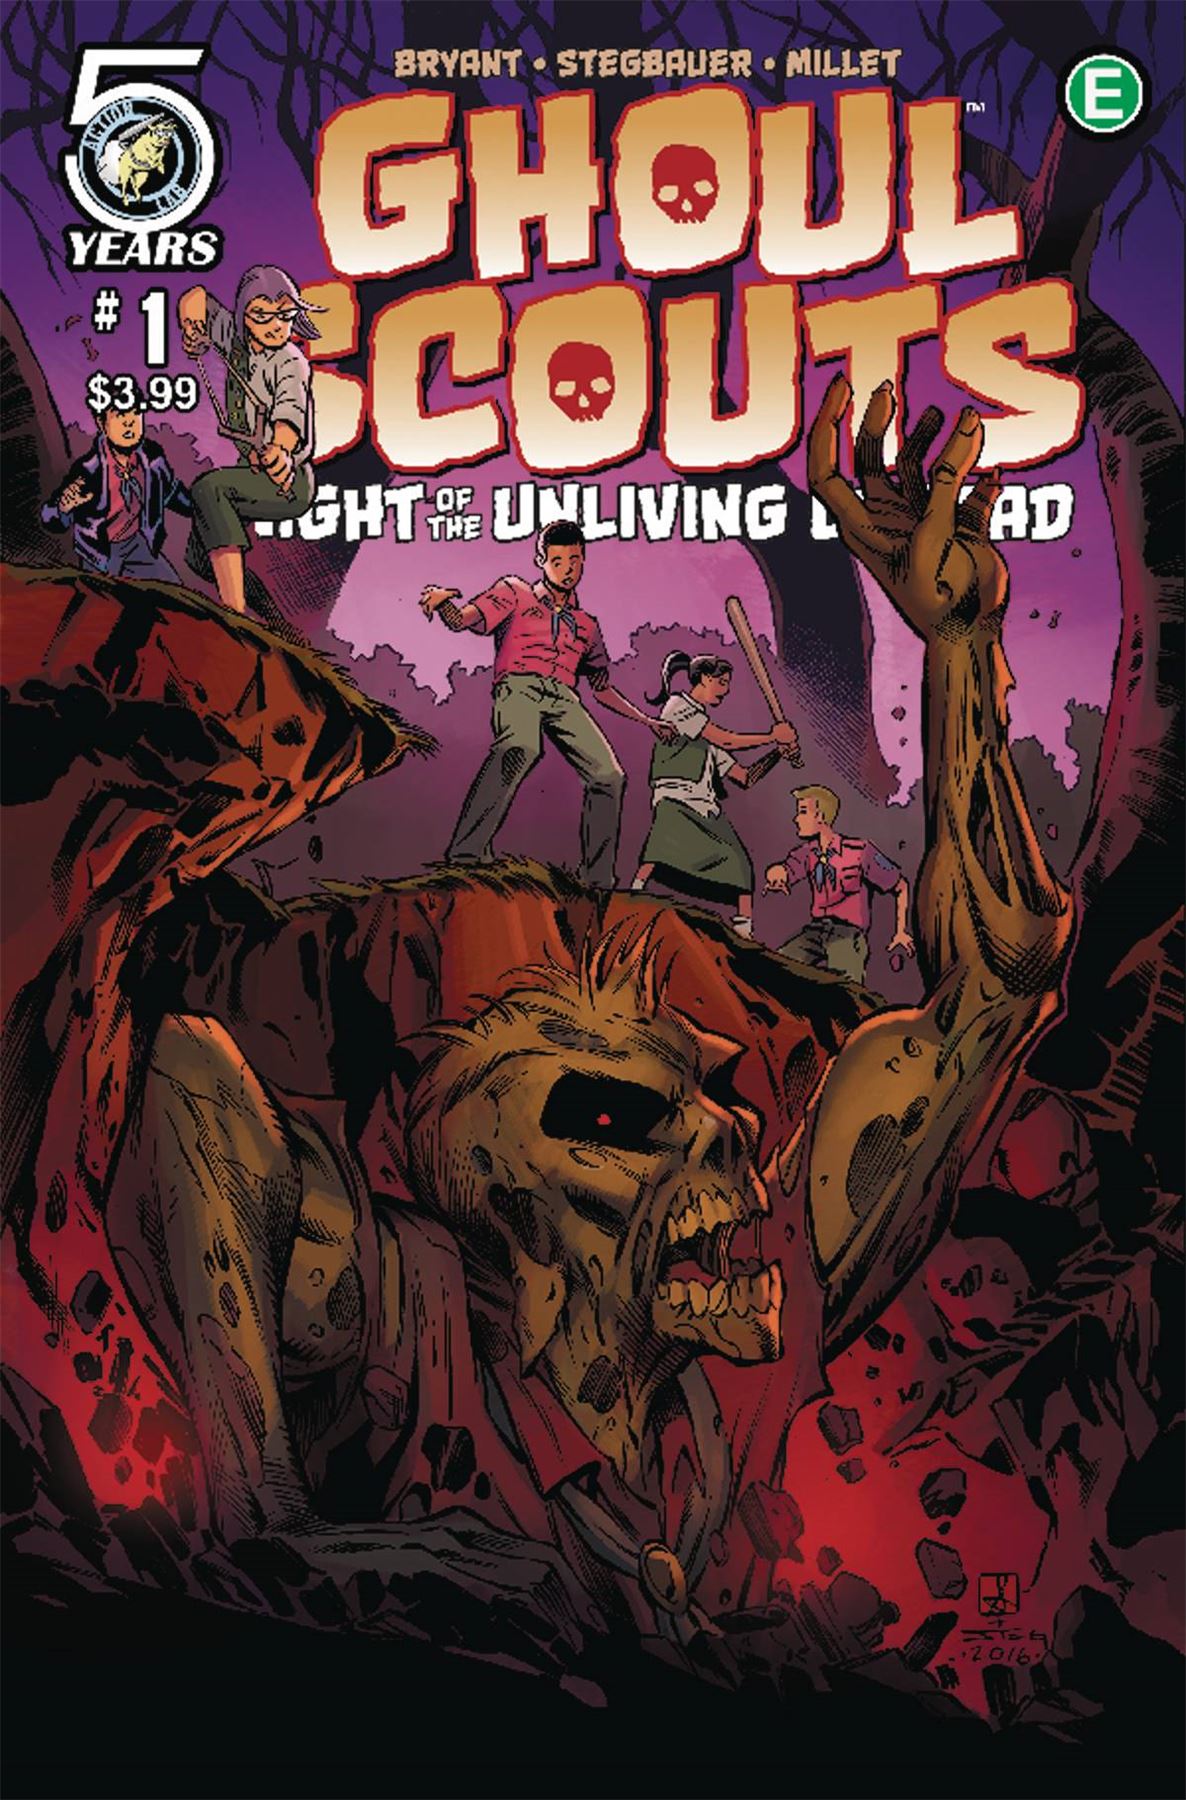 Ghoul Scouts Night Of The Unliving Undead #1 Cvr C Izaakse (Cvr C Izaakse) Action Lab Entertainment Comic Book